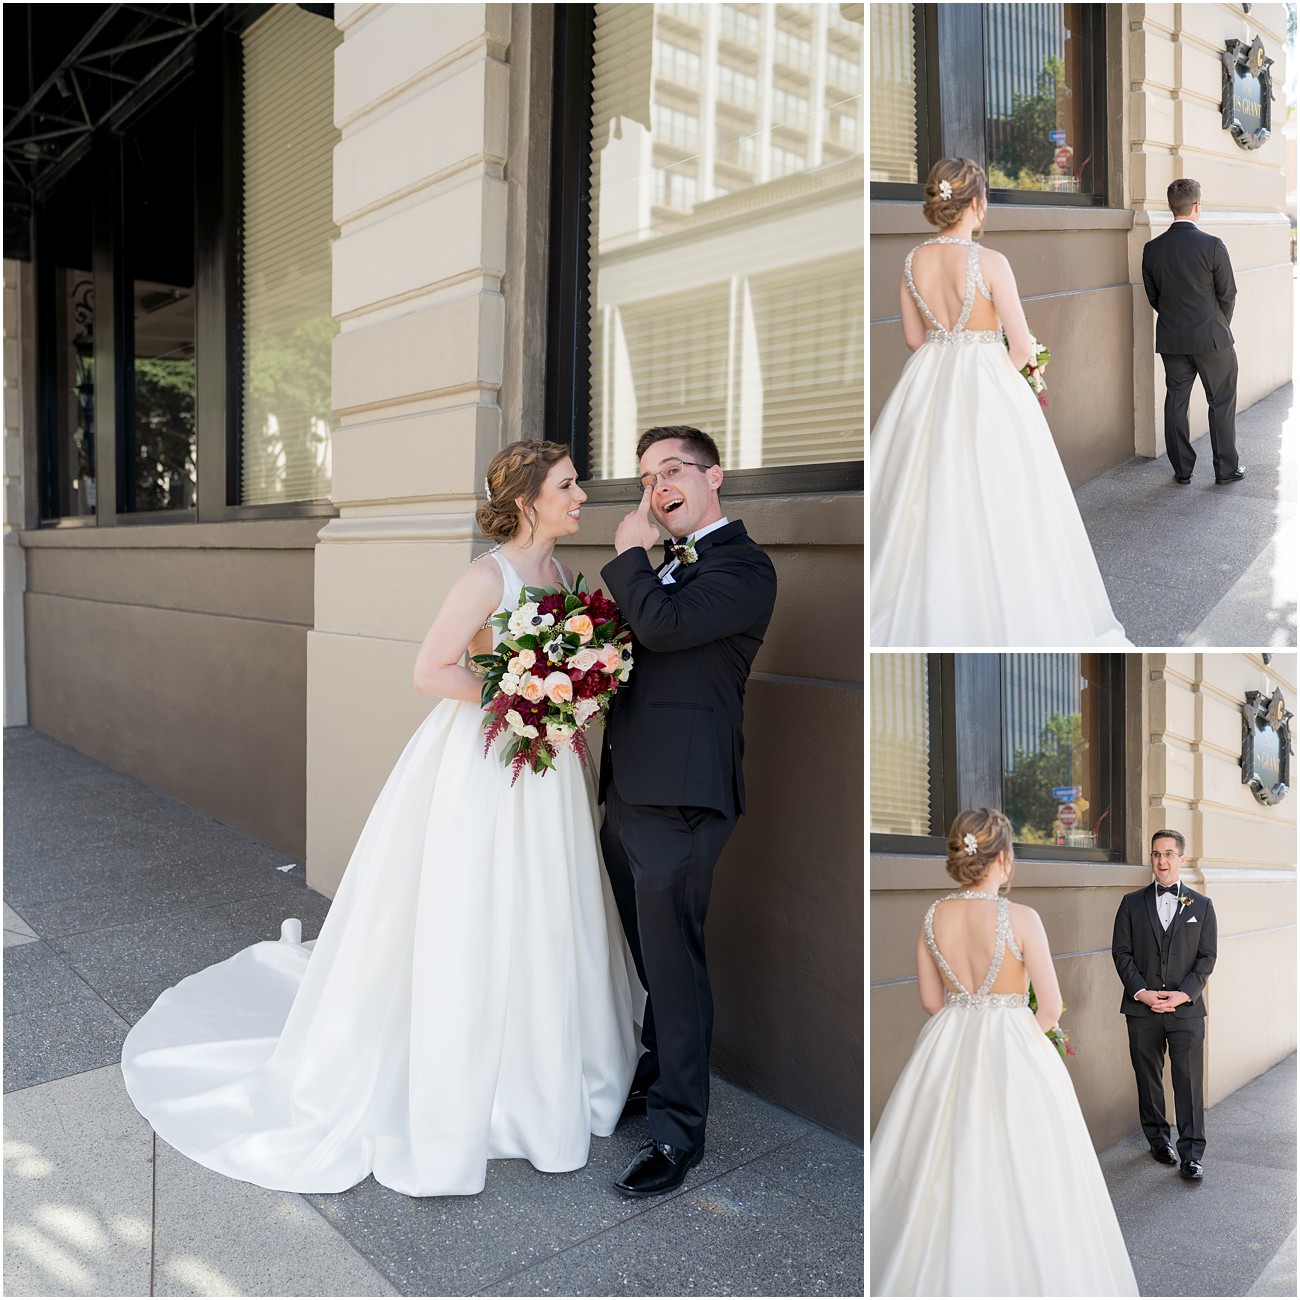 First look between a bride and groom at a wedding venue in San Diego California